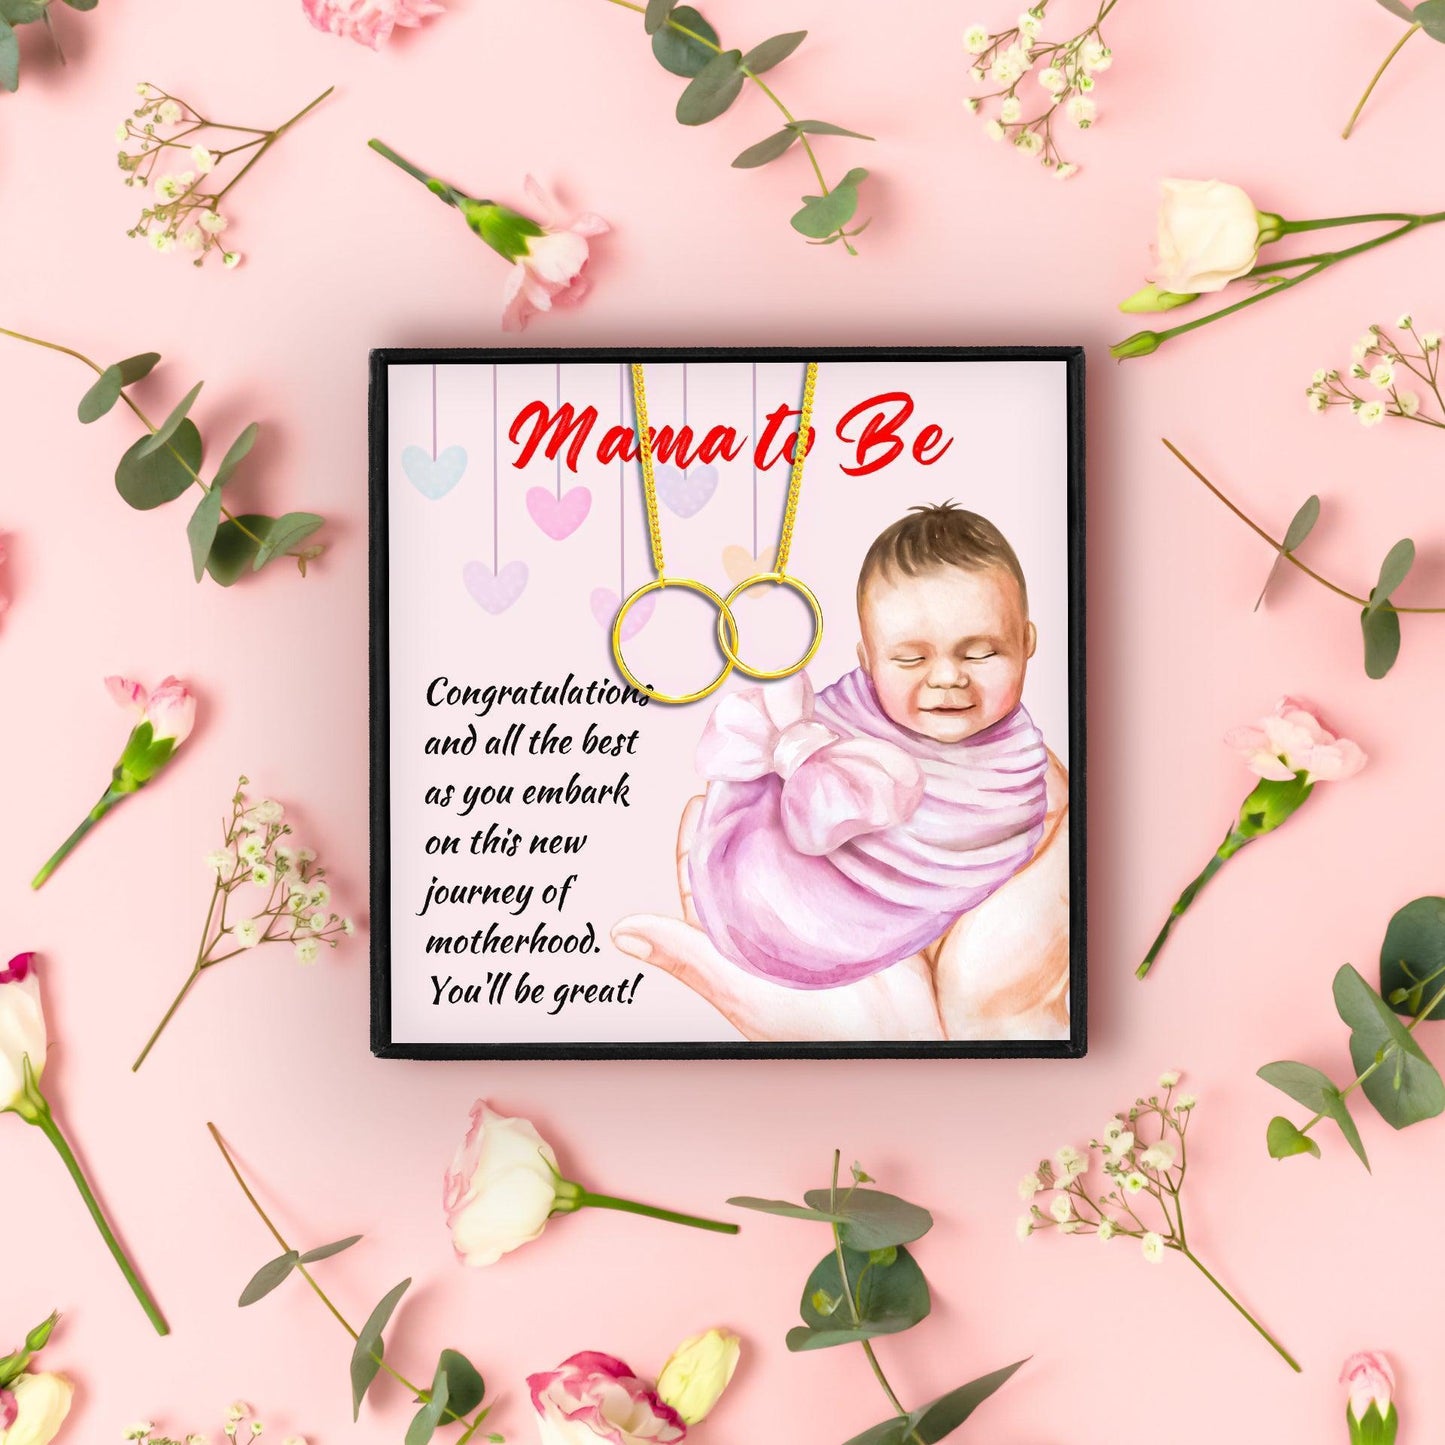 Mom To Be Gift That'll Definitely Make Them Feel Loved for Christmas 2023 | Mom To Be Gift That'll Definitely Make Them Feel Loved - undefined | Gifts for Pregnant Women, mama to be necklace, mom to be necklace, Mommy To Be Necklace, New Mom Jewelry | From Hunny Life | hunnylife.com